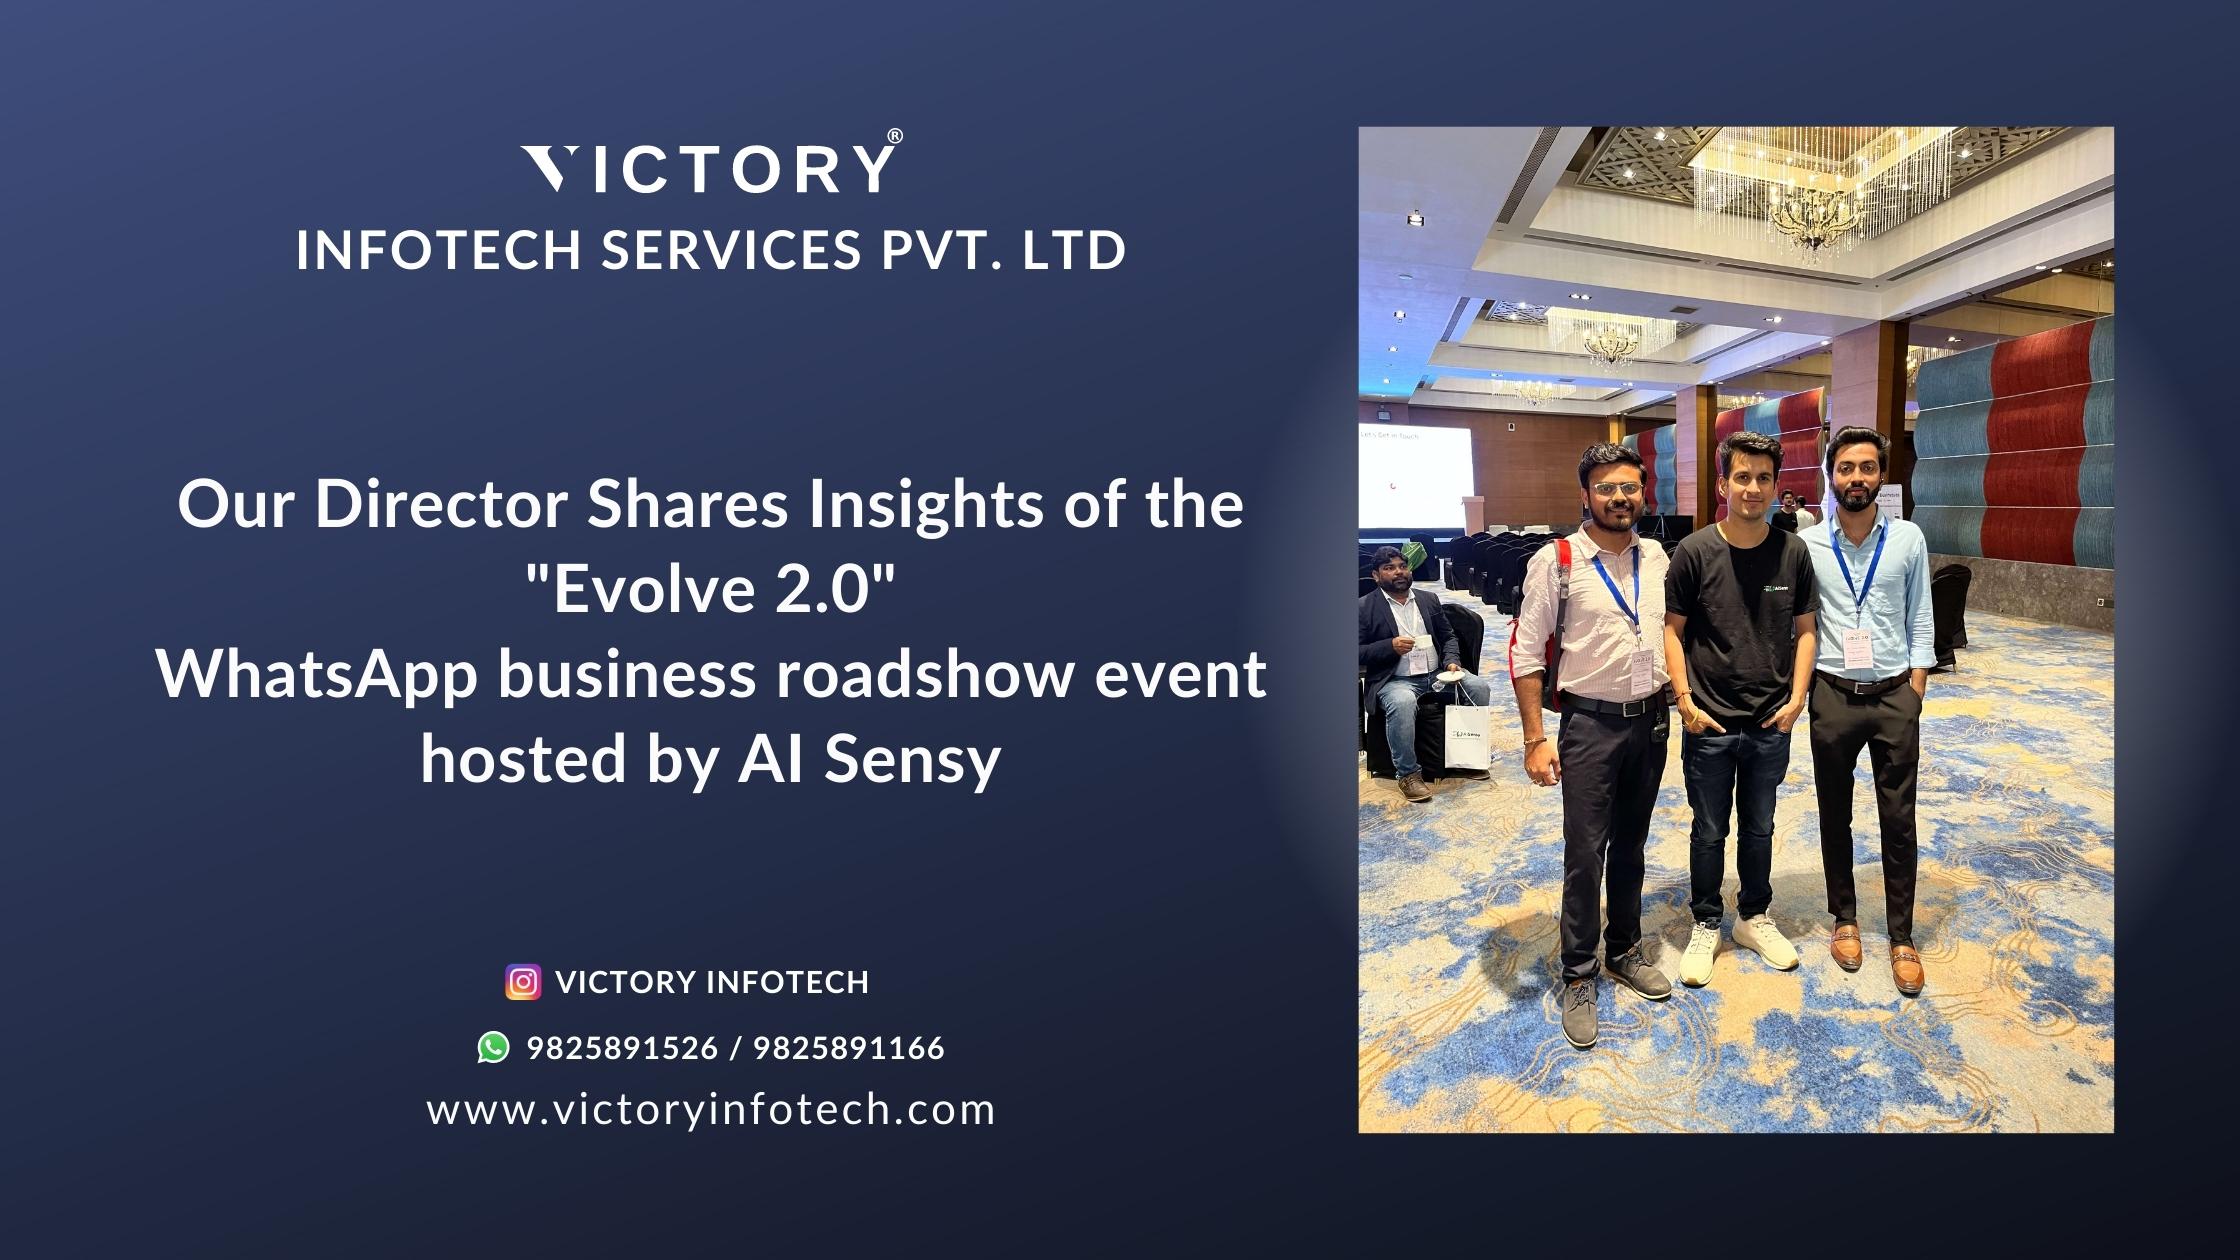 Our Director Shares Insights of the Evolve 2.0 event hosted by AI Sensy